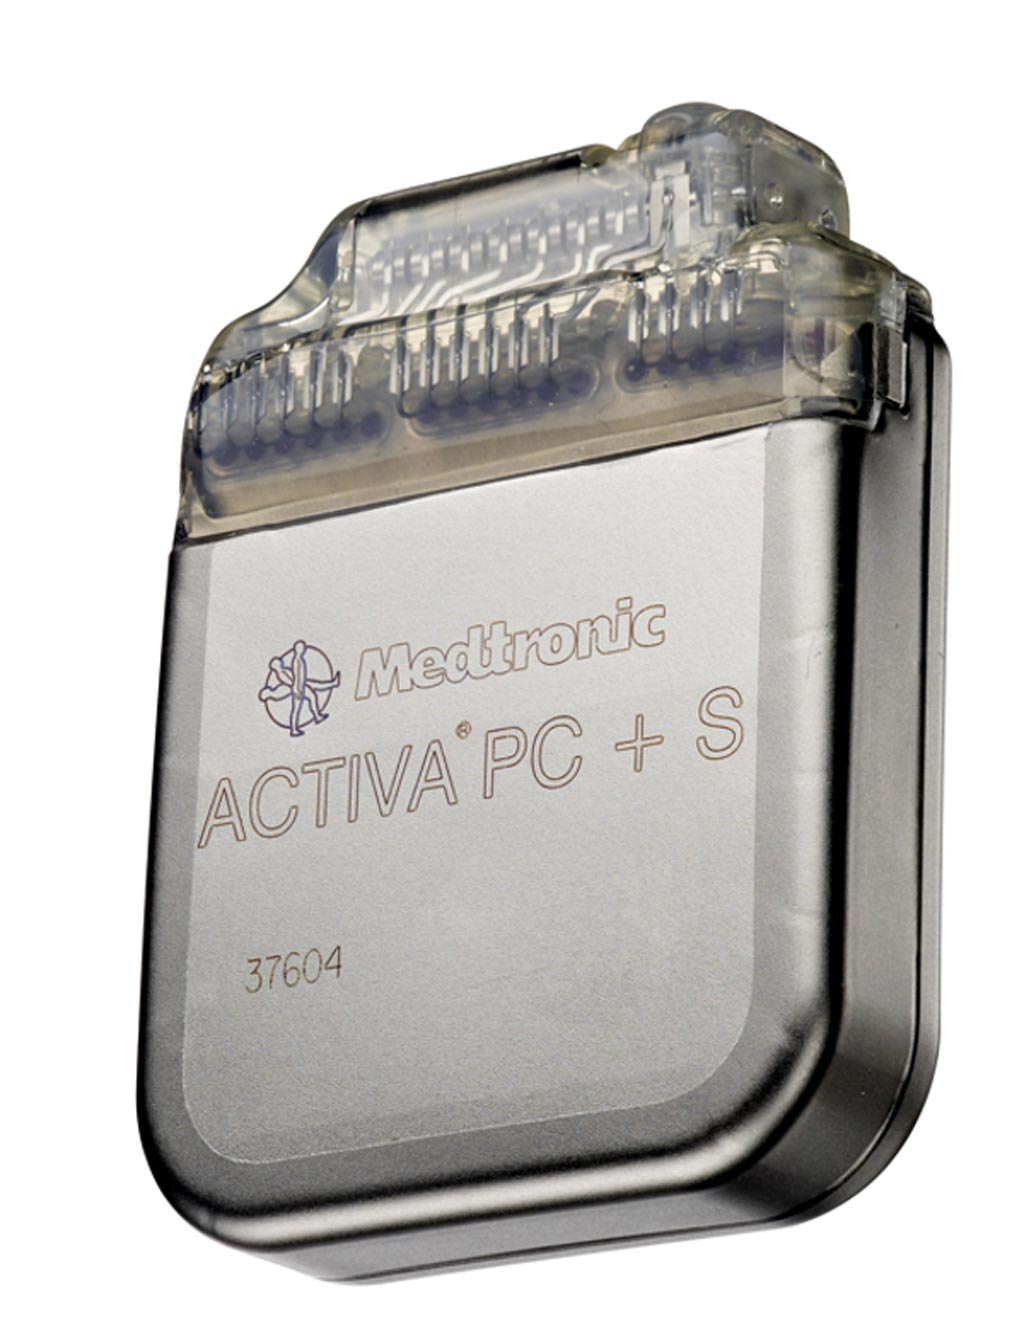 Image: The Activa PC+S DBS System (Photo courtesy of Medtronic).